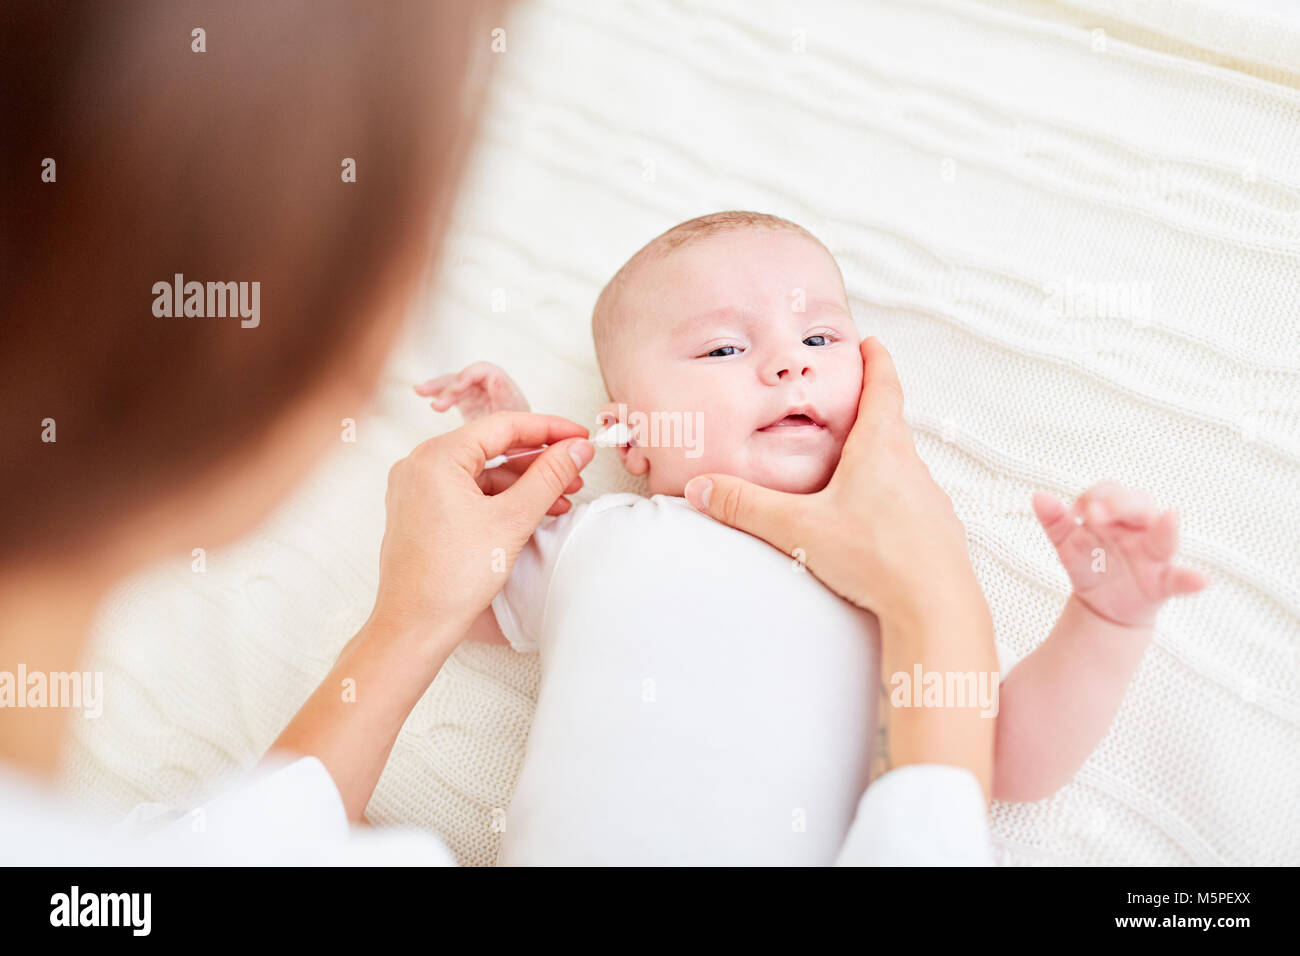 Baby care mom cleans baby's ears with a cotton swab Stock Photo